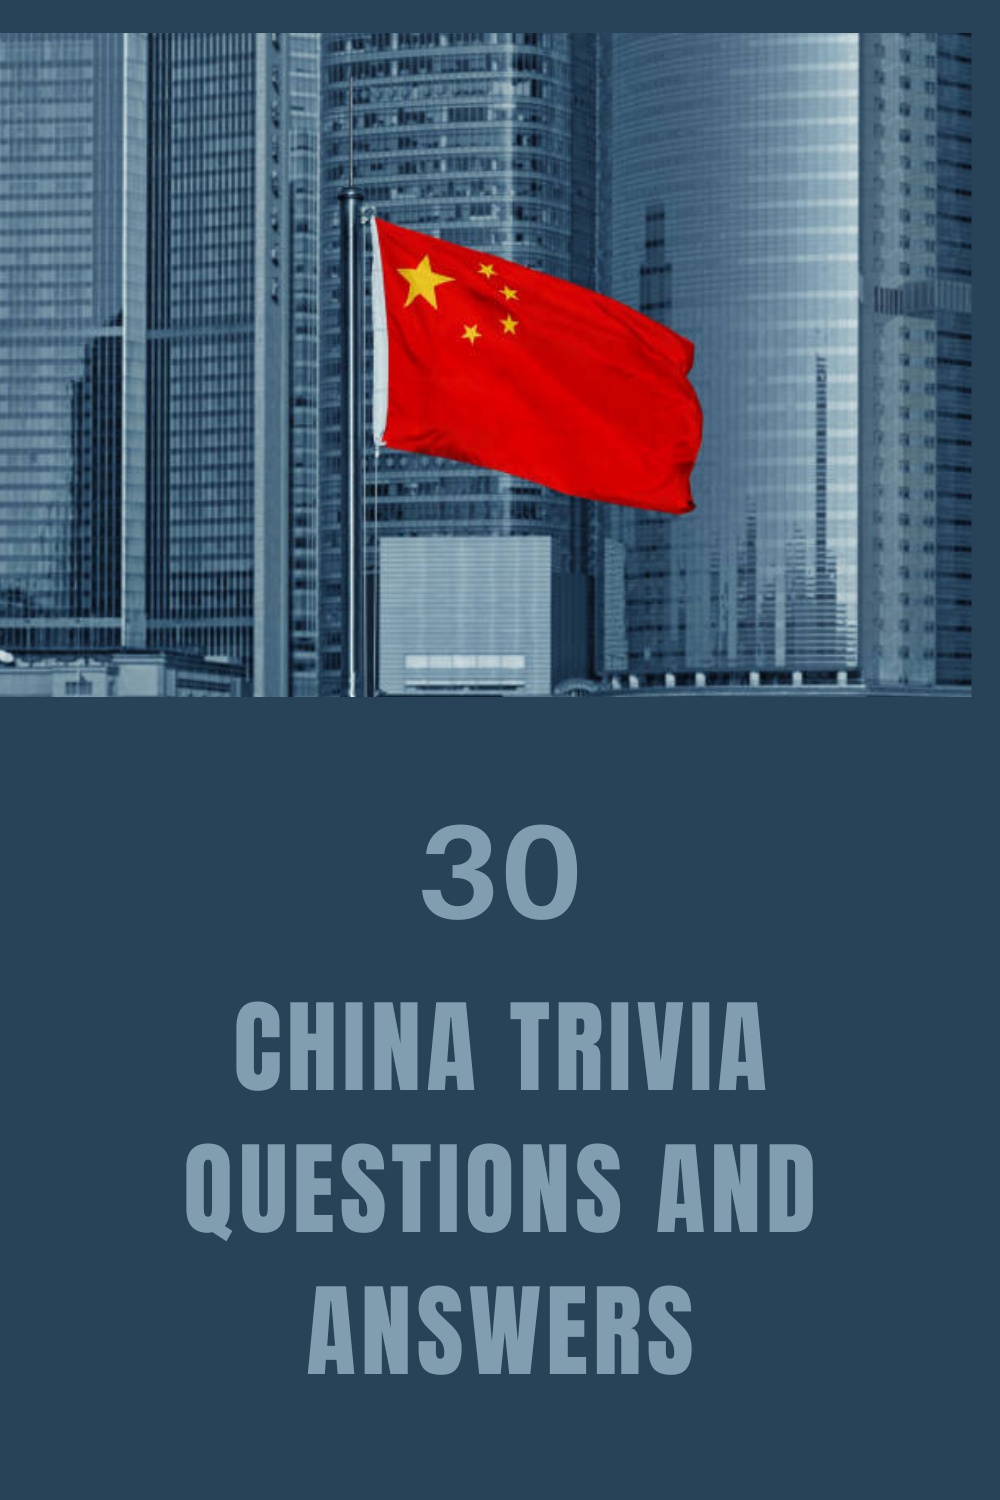 30 China Trivia Questions and Answers